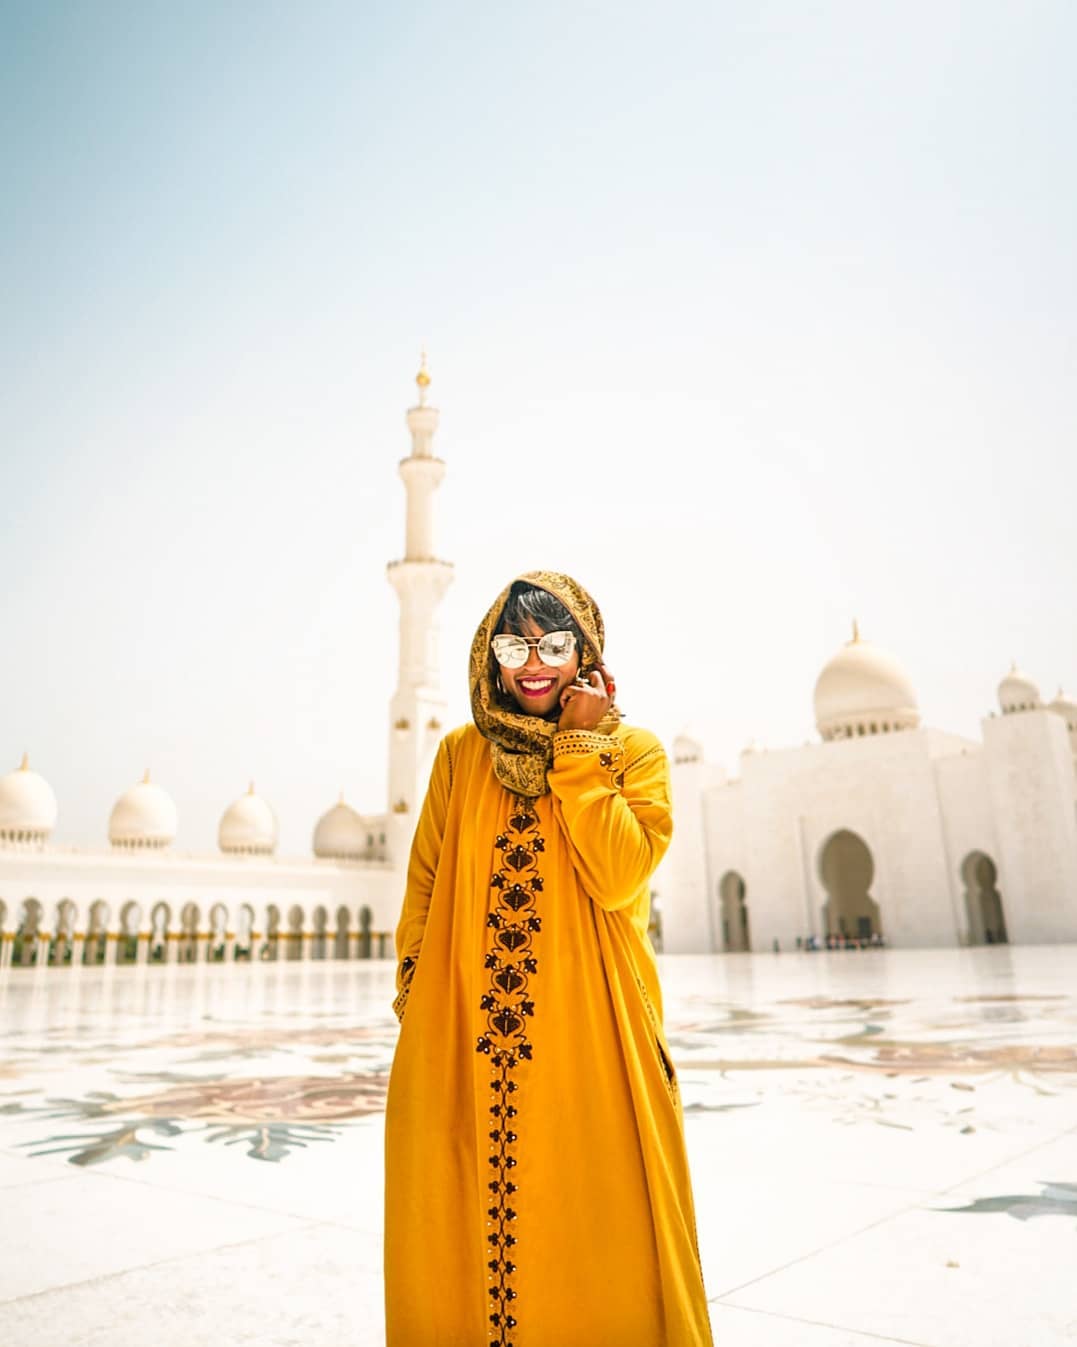 Girl in yellow sari in front of a mosque. Photo by Instagram user @glographics